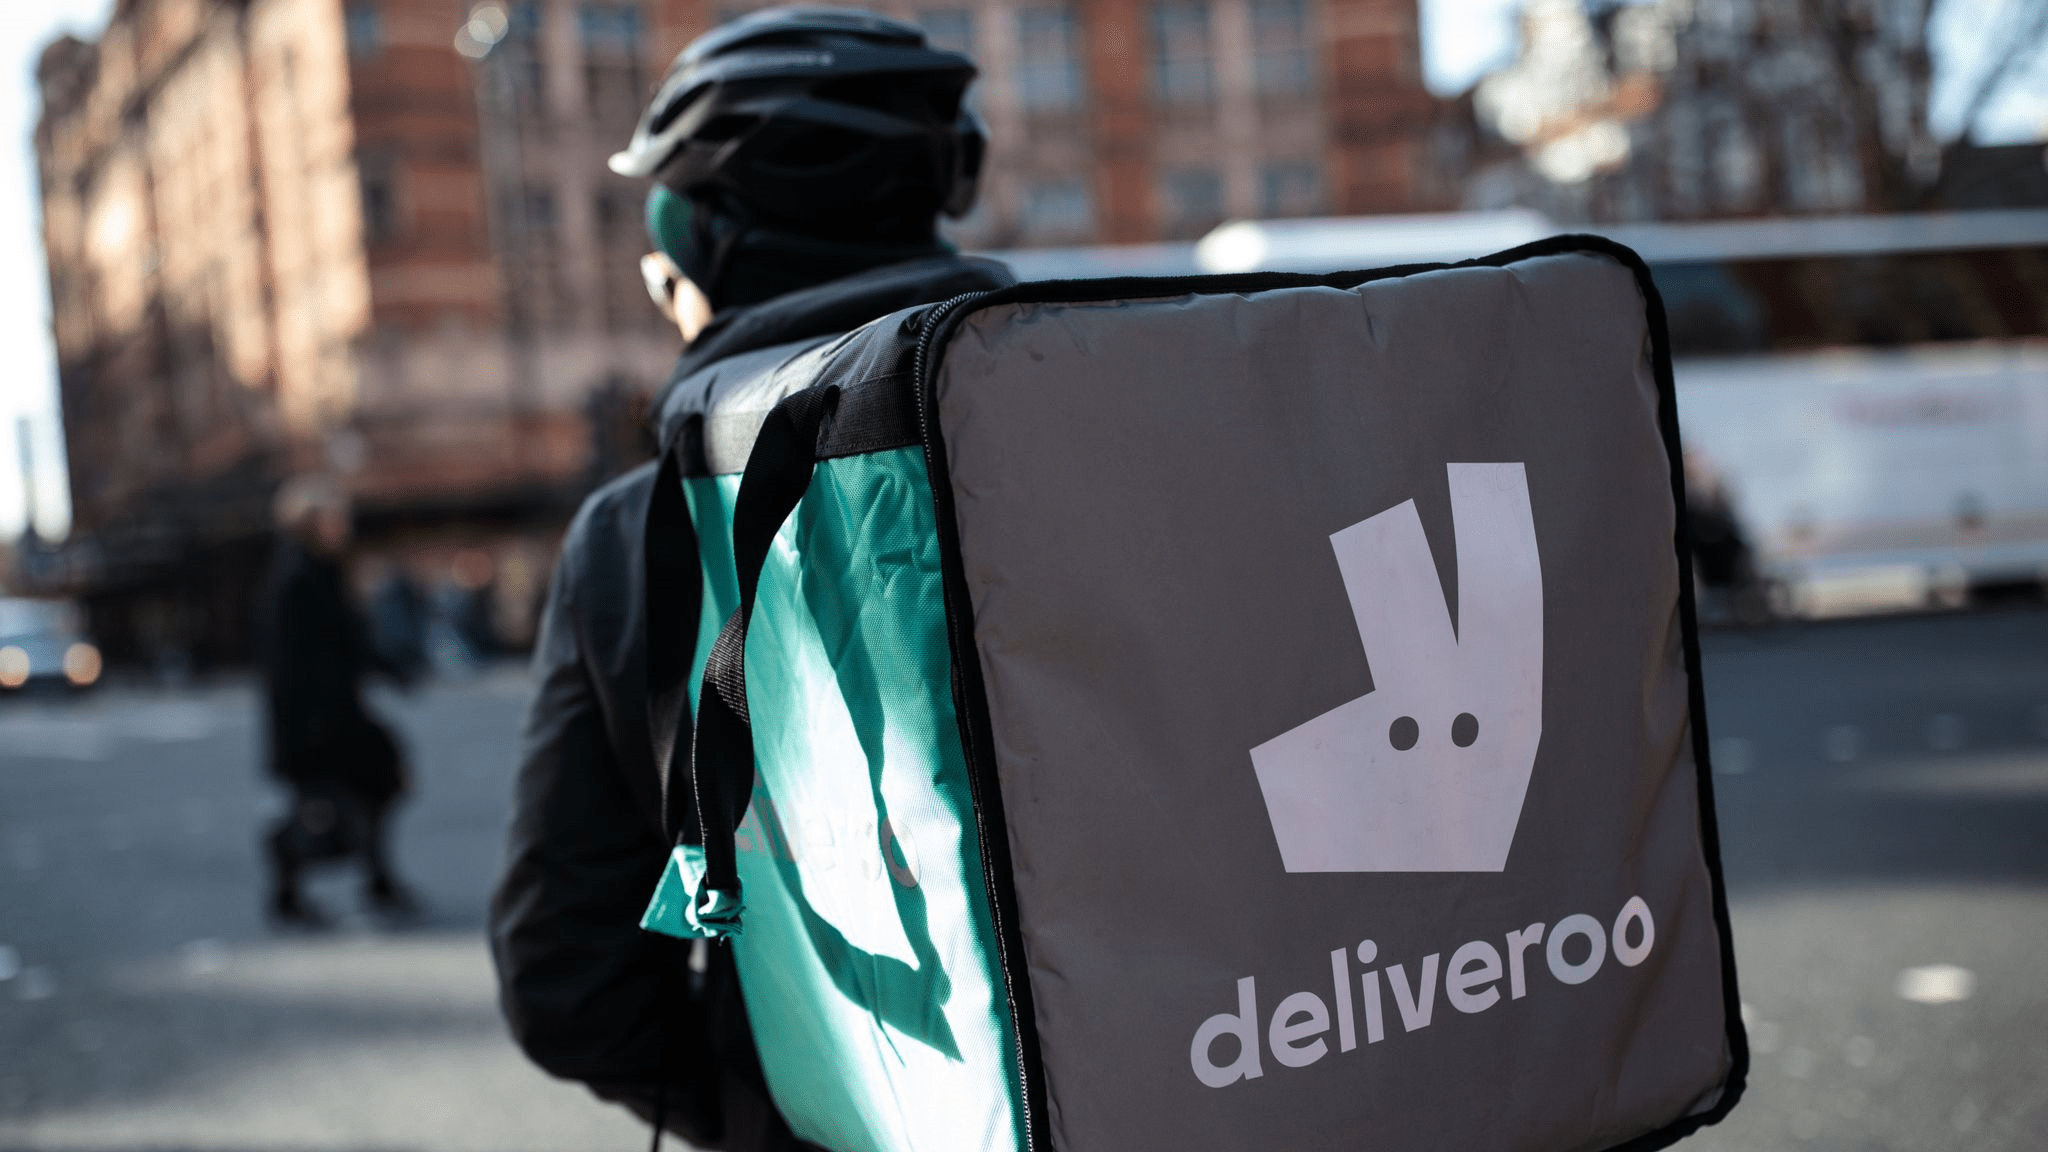 Amazon-backed food delivery app Deliveroo flopped in its market debut